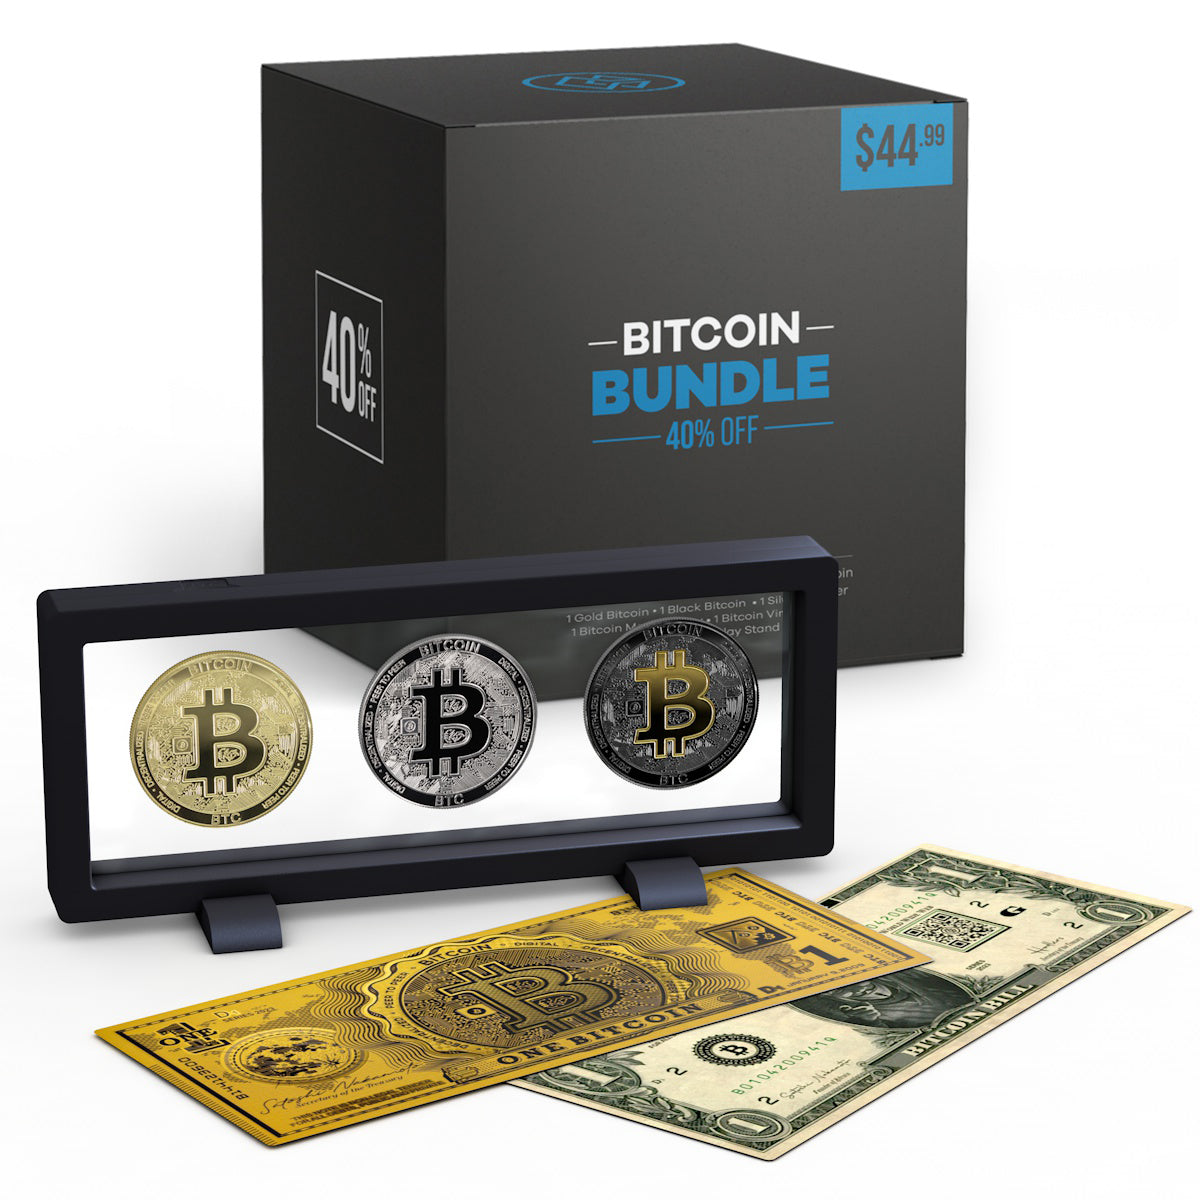 Cryptochips | Bitcoin Bundle Physical Crypto Coin. Collectable cryptocurrency merch you can hodl